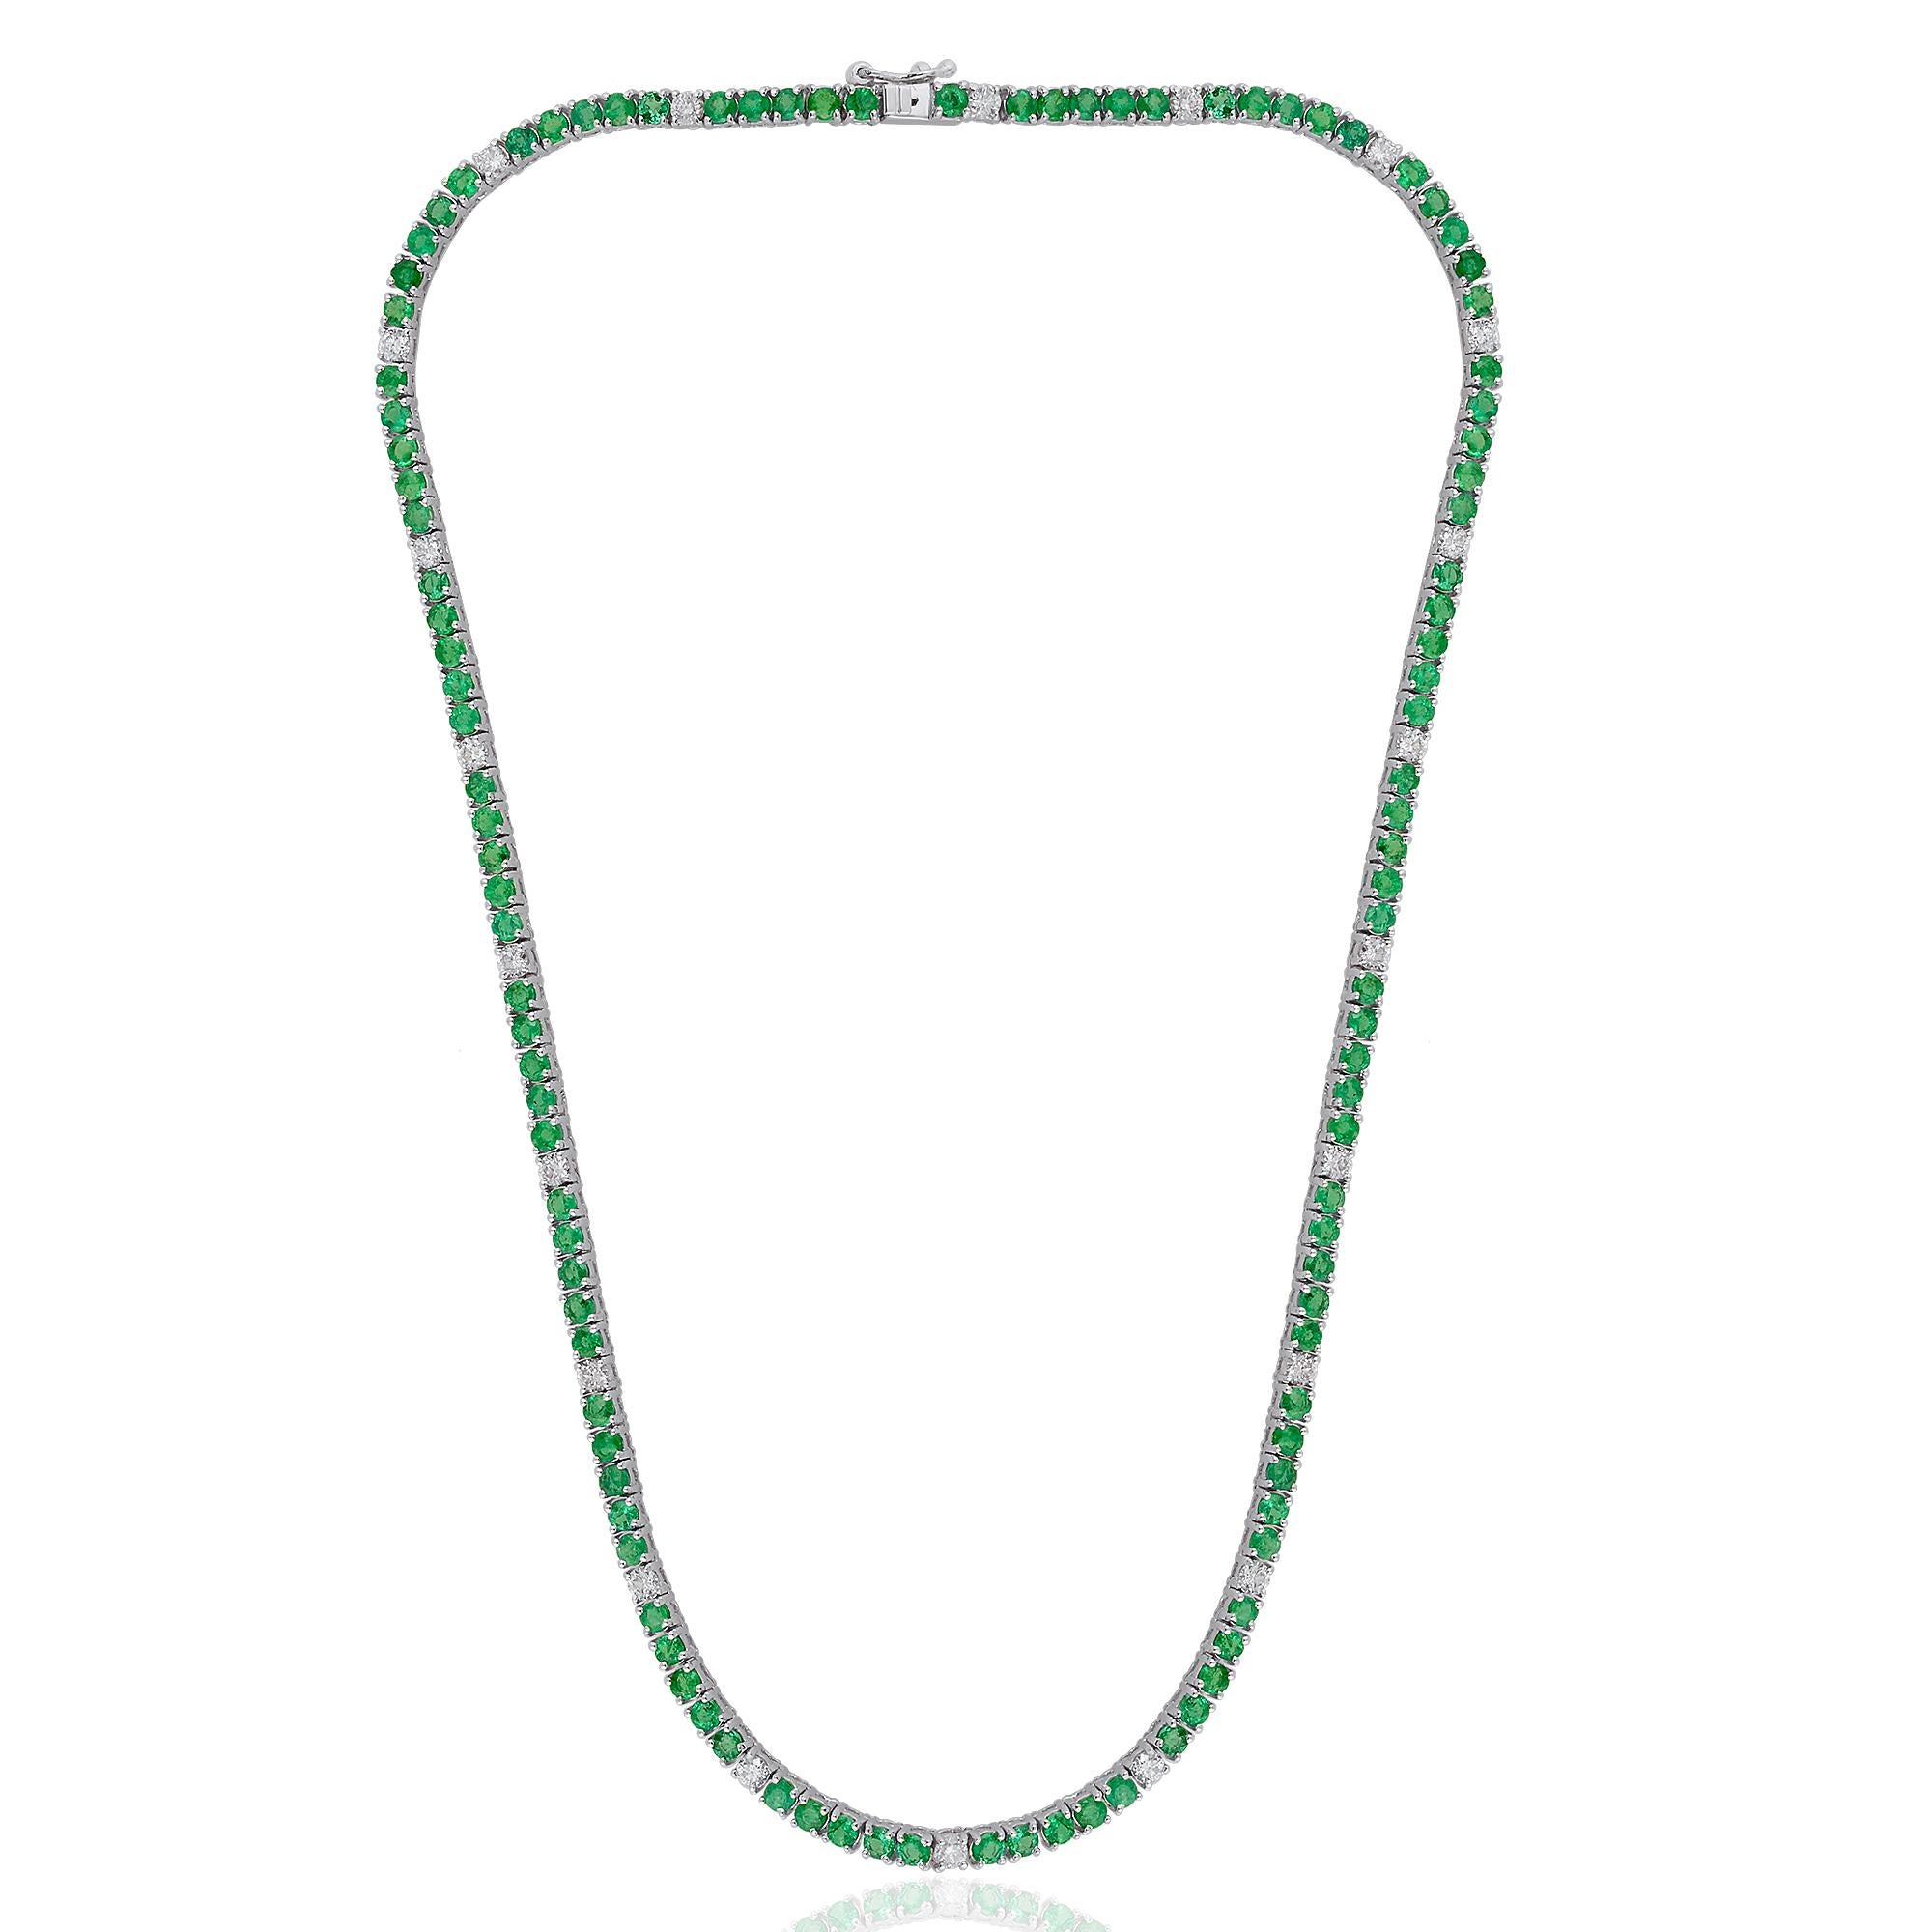 This Natural Emerald Gemstone Chain is a versatile piece that can be worn on its own as a statement accessory or layered with other necklaces for a personalized and fashionable look. Whether you're attending a special occasion, a formal event, or